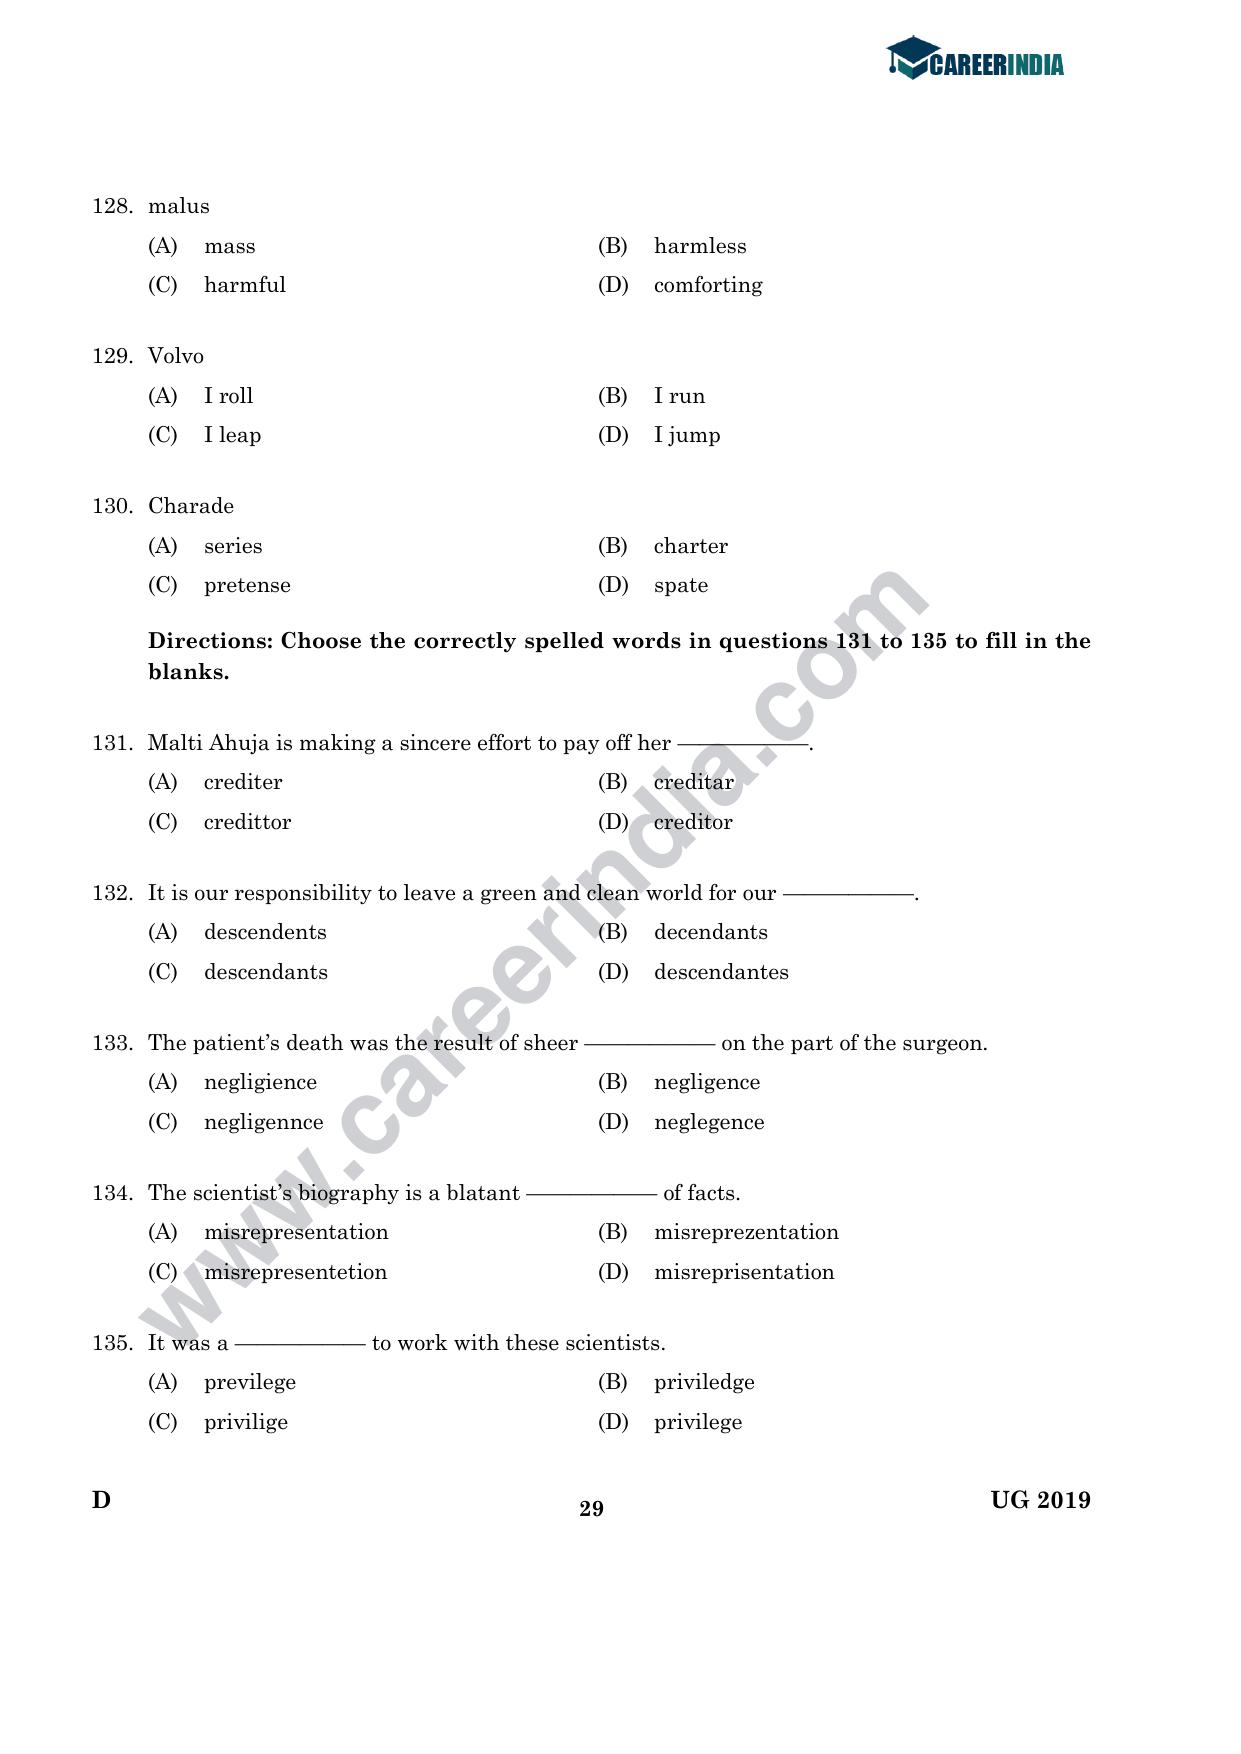 CLAT 2019 UG Logical-Reasoning Question Paper - Page 28